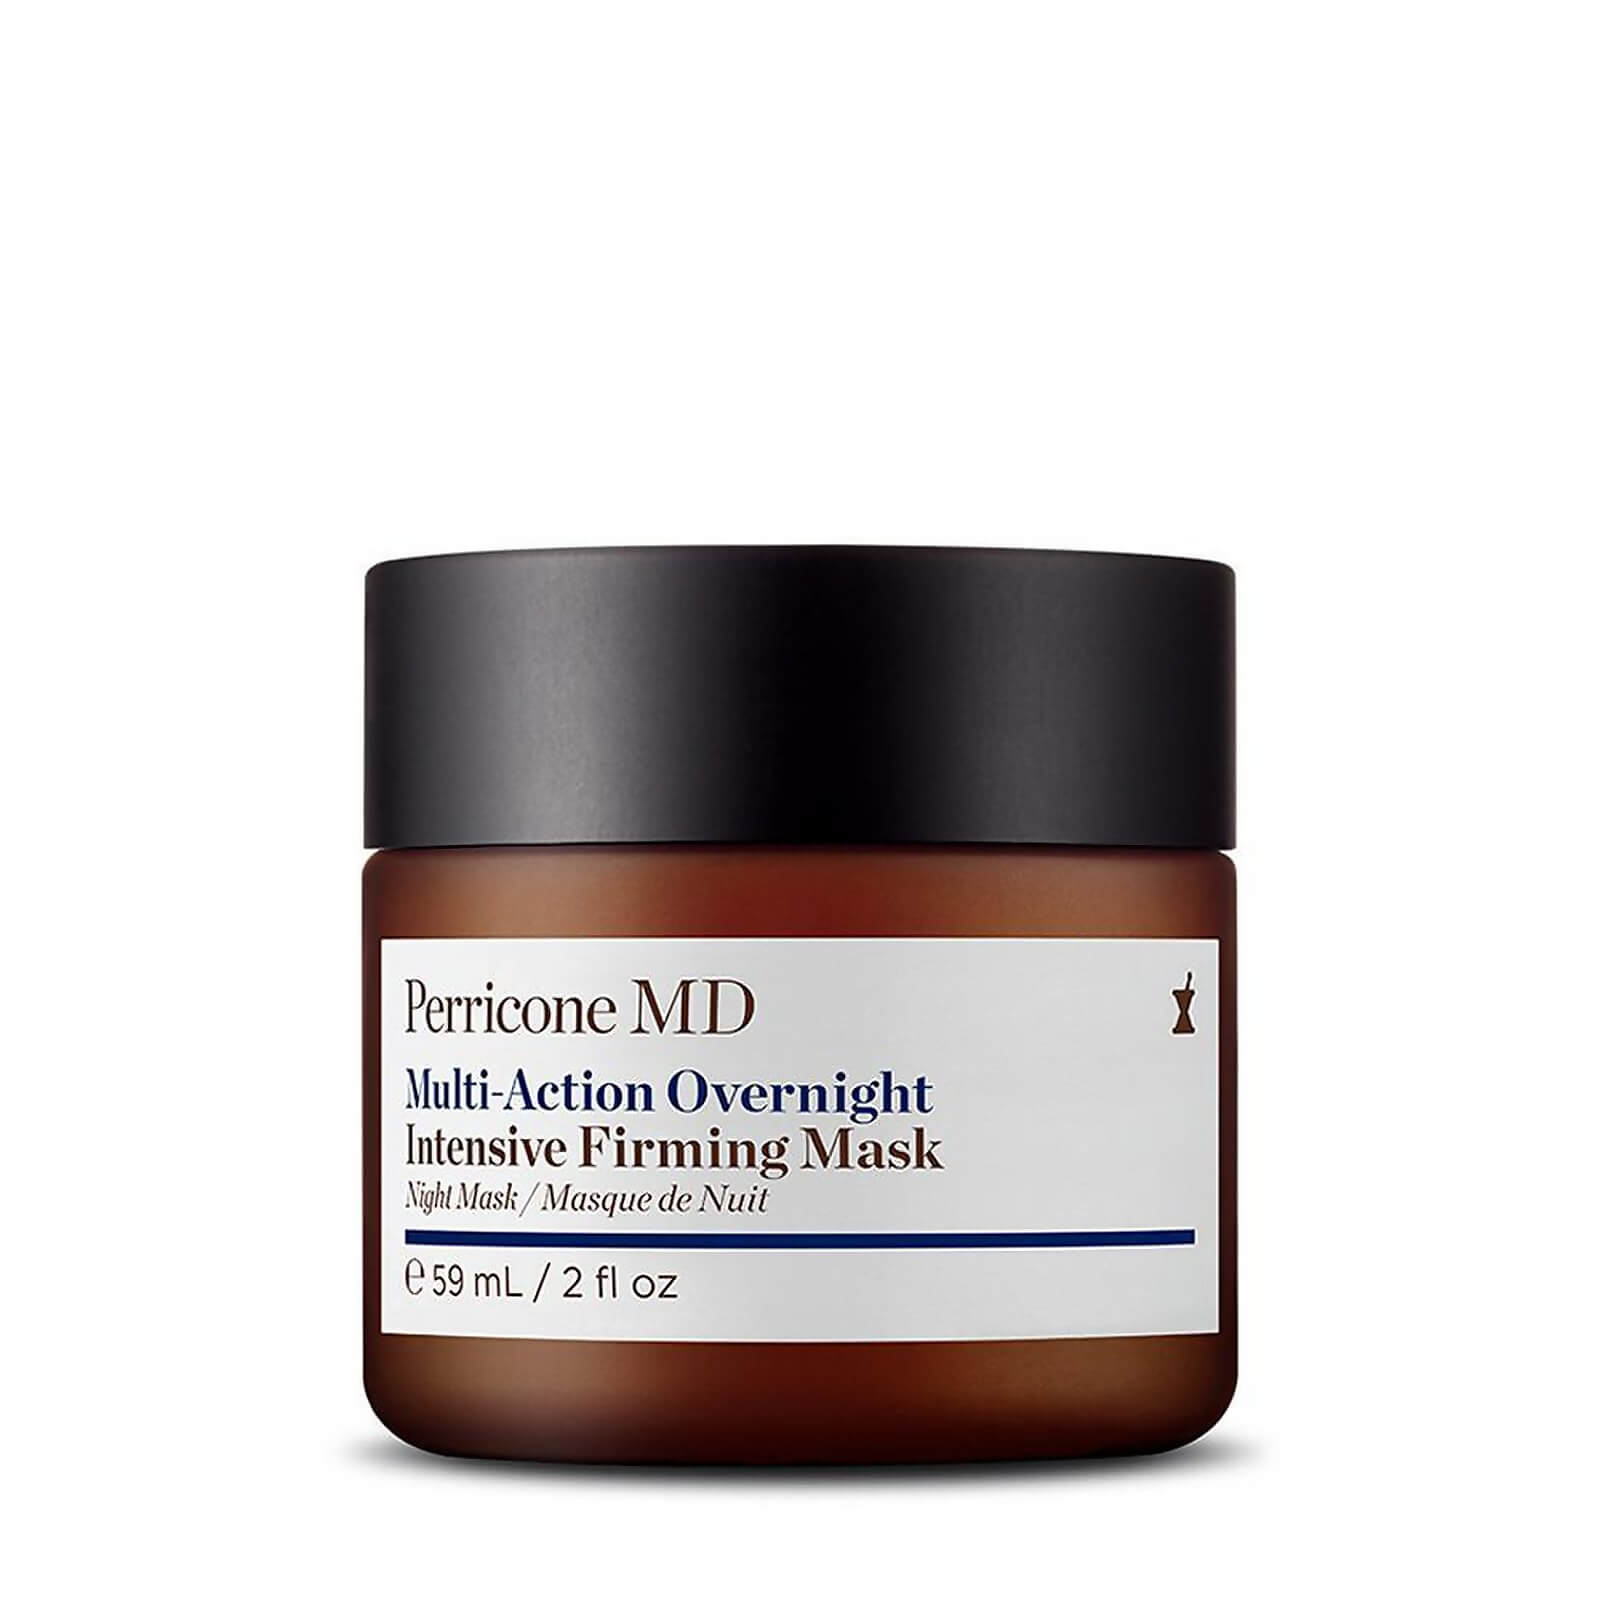 Photos - Facial Mask Perricone MD Multi-Action Overnight Firming Mask 59ml 52030001EU 